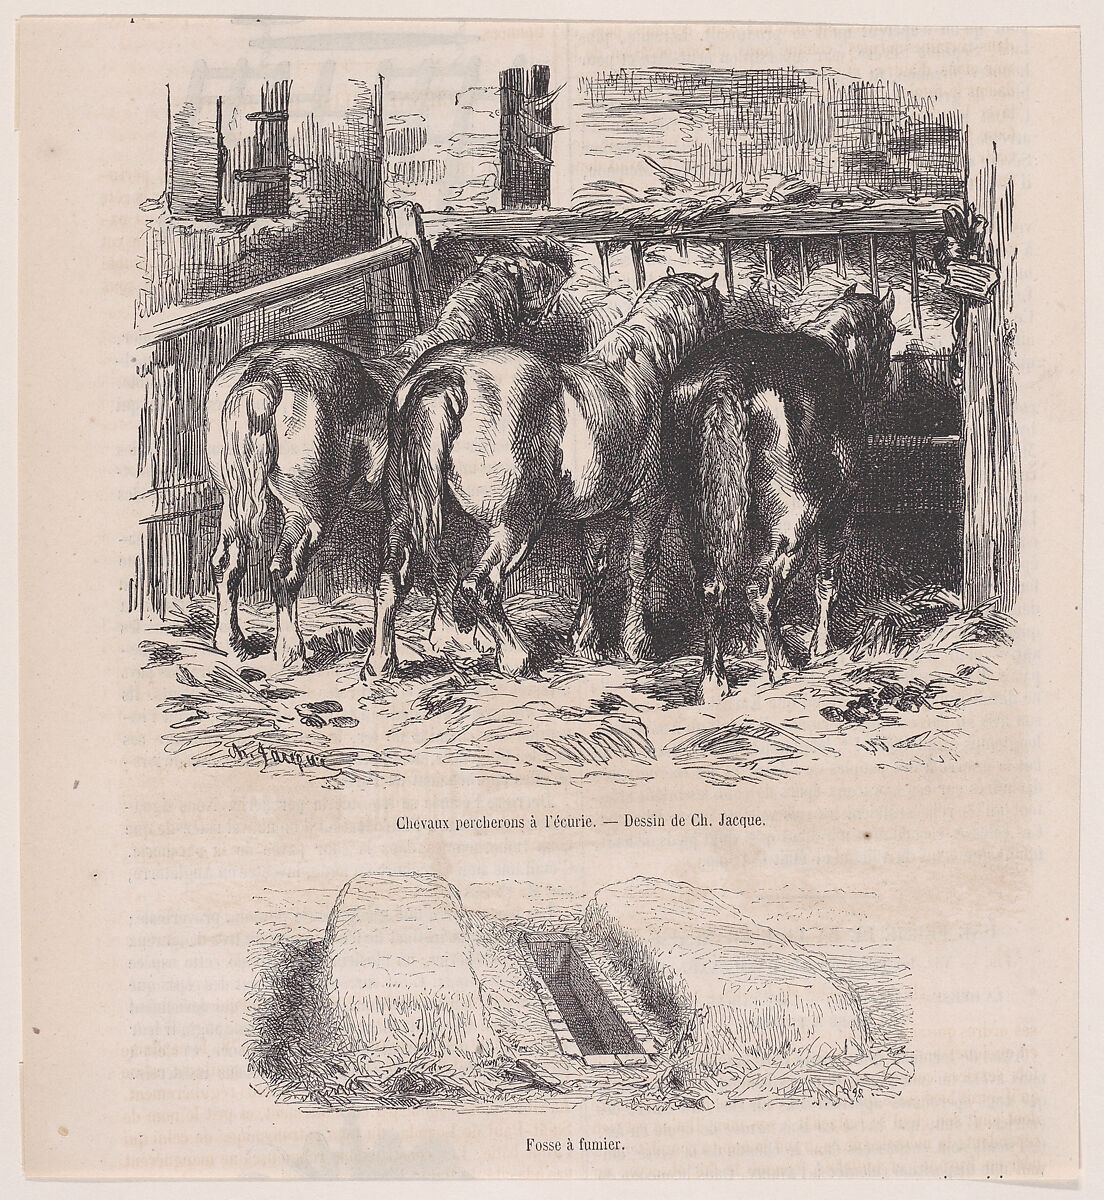 Percheron Horses in a Stable and A Manure Pit, from "Le Magasin Pittoresque", Charles Jacque (French, Paris 1813–1894 Paris), Wood engraving 